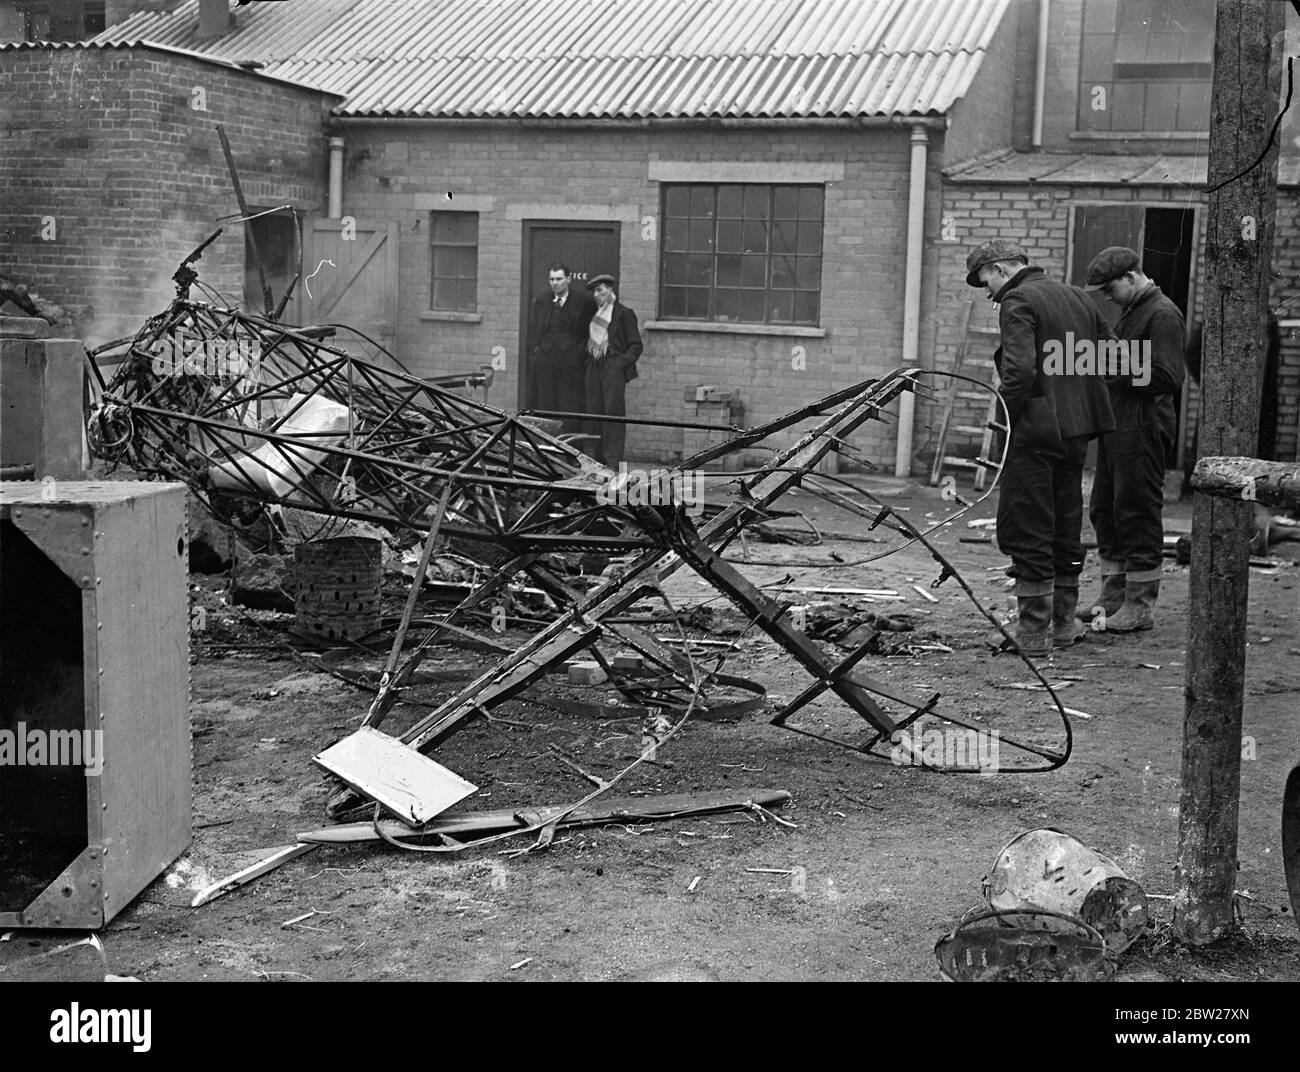 Three die when RAF and civil plane collided over Hertfordshire. Planes crash in brickworks. Three men, an RAF officer and a pilot instructor and pupil were killed when a Gloucester Gauntlet Plane from Duxford and a de Havilland Tiger Moth plane collided in midair and crashed in flames at Smallford, near St Albans, Hertfordshire. The service plane fell in a field adjoining a brickyard and the civil machine, crashed into a gravel pit, causing 20 men to run for their lives. Photo shows, the tangled wreckage of the civil Tiger Moth amongst the buildings of the gravel pit. 21 January 1938 Stock Photo